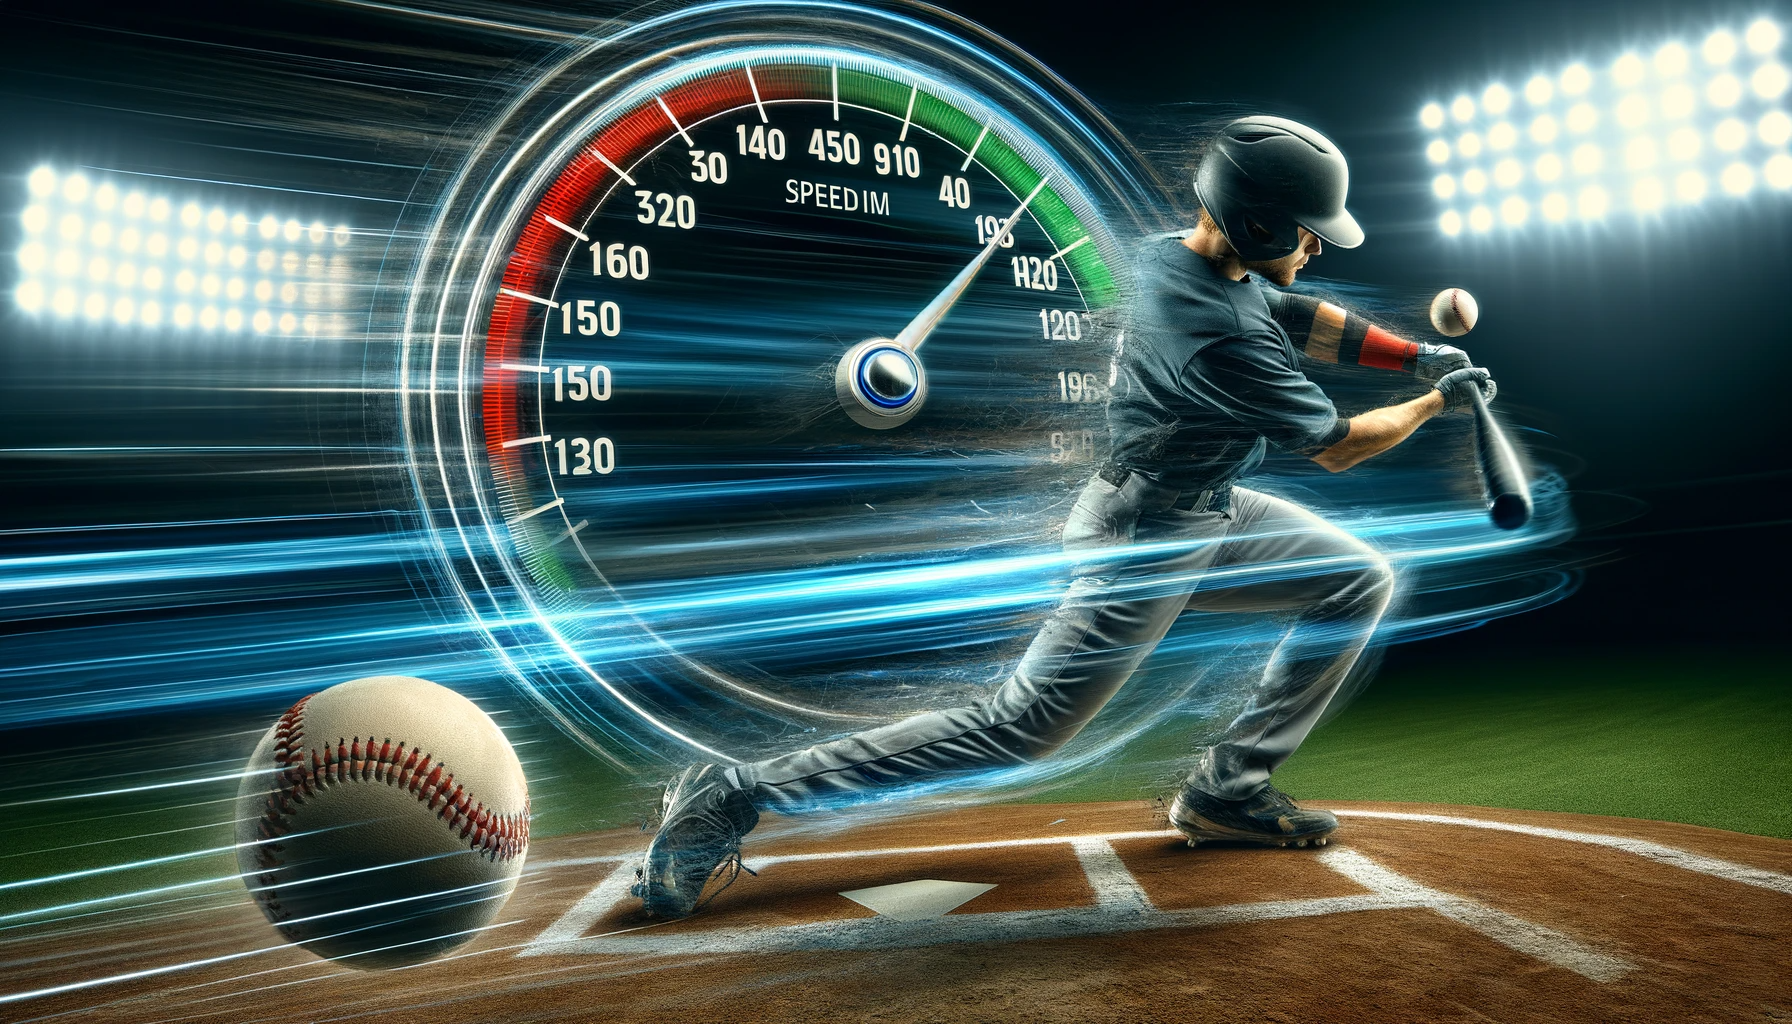 How Fast Does a Baseball Come Off the Bat? Unveiling Speed!